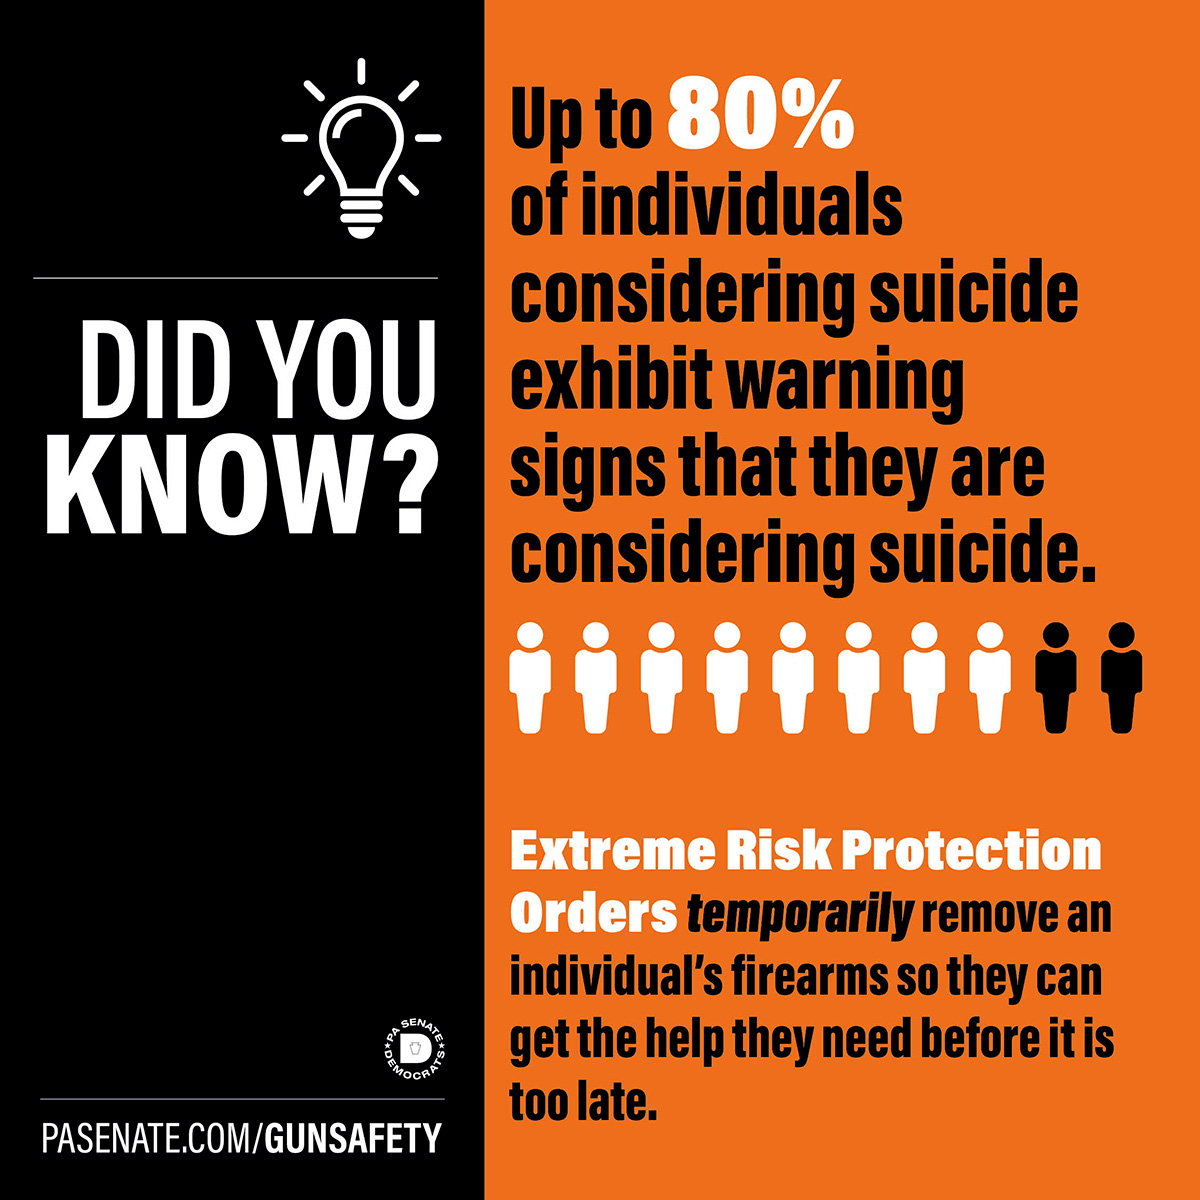 Did you know? Up to 80% of individuals considering suicide exhibit warning signs that they are considering suicide.